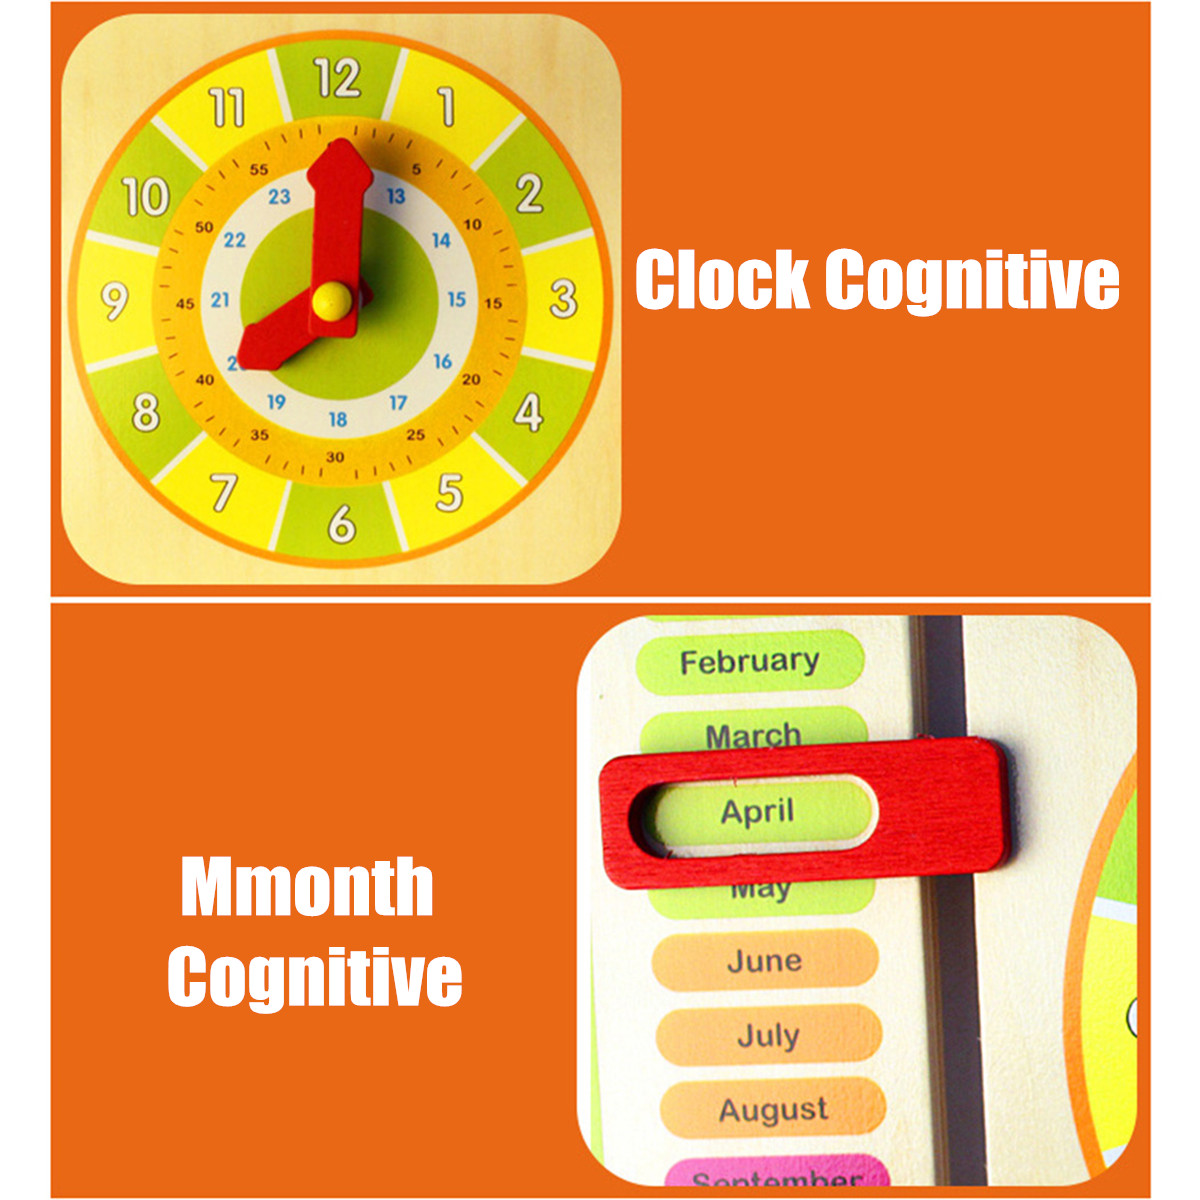 Wooden-Multifunction-Learning-Clock-Toy-Alarm-Calendar-Cognition-Educational-Toys-1550385-6